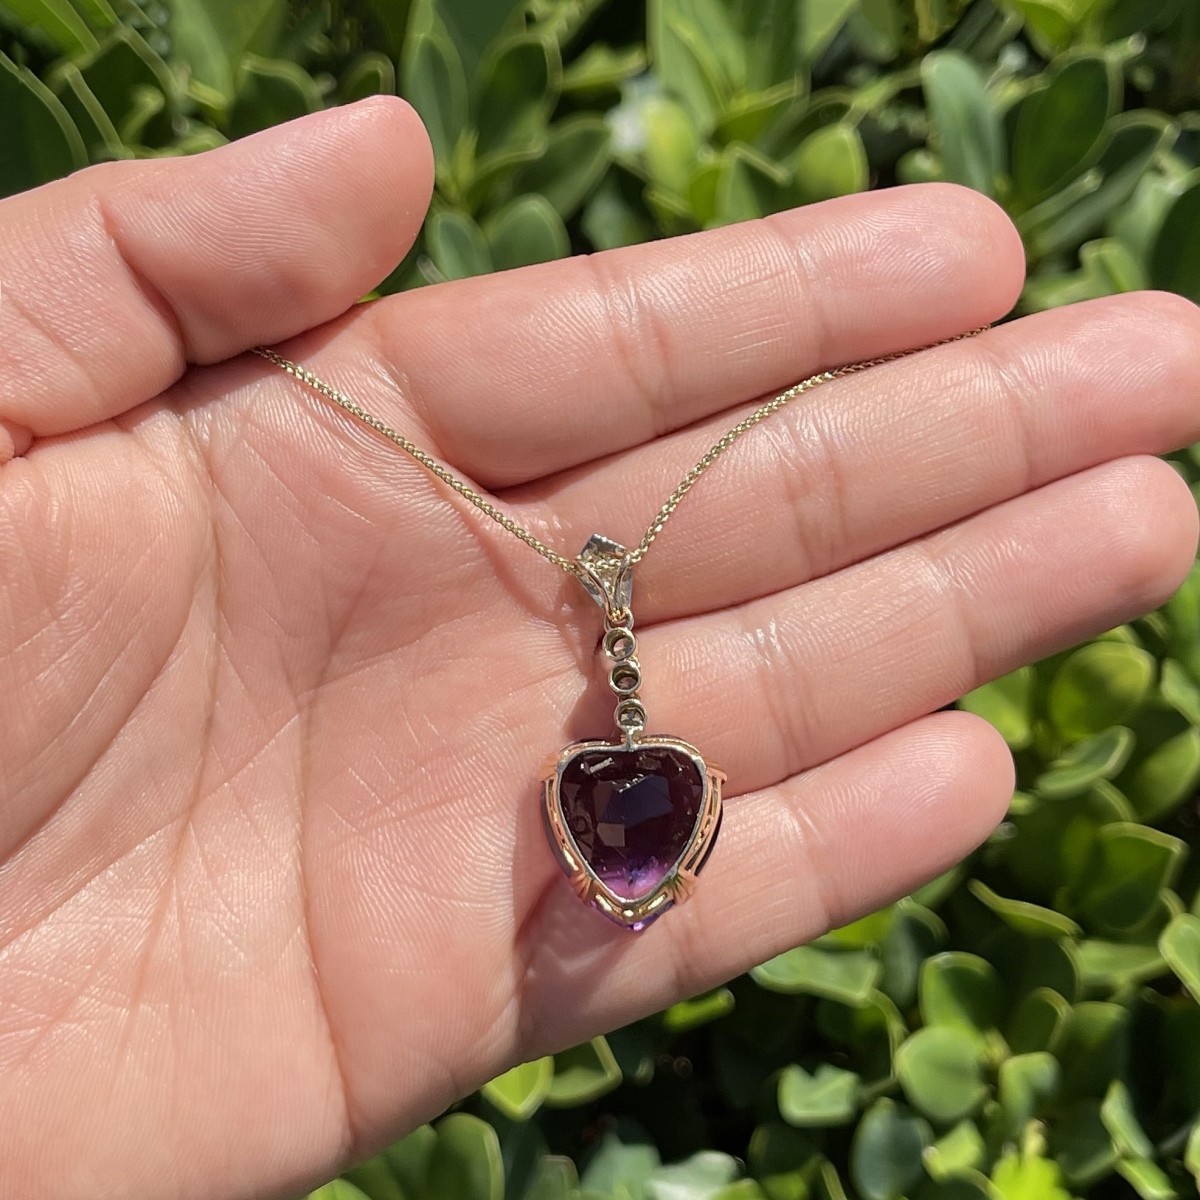 Amethyst, Diamond and 14K Necklace